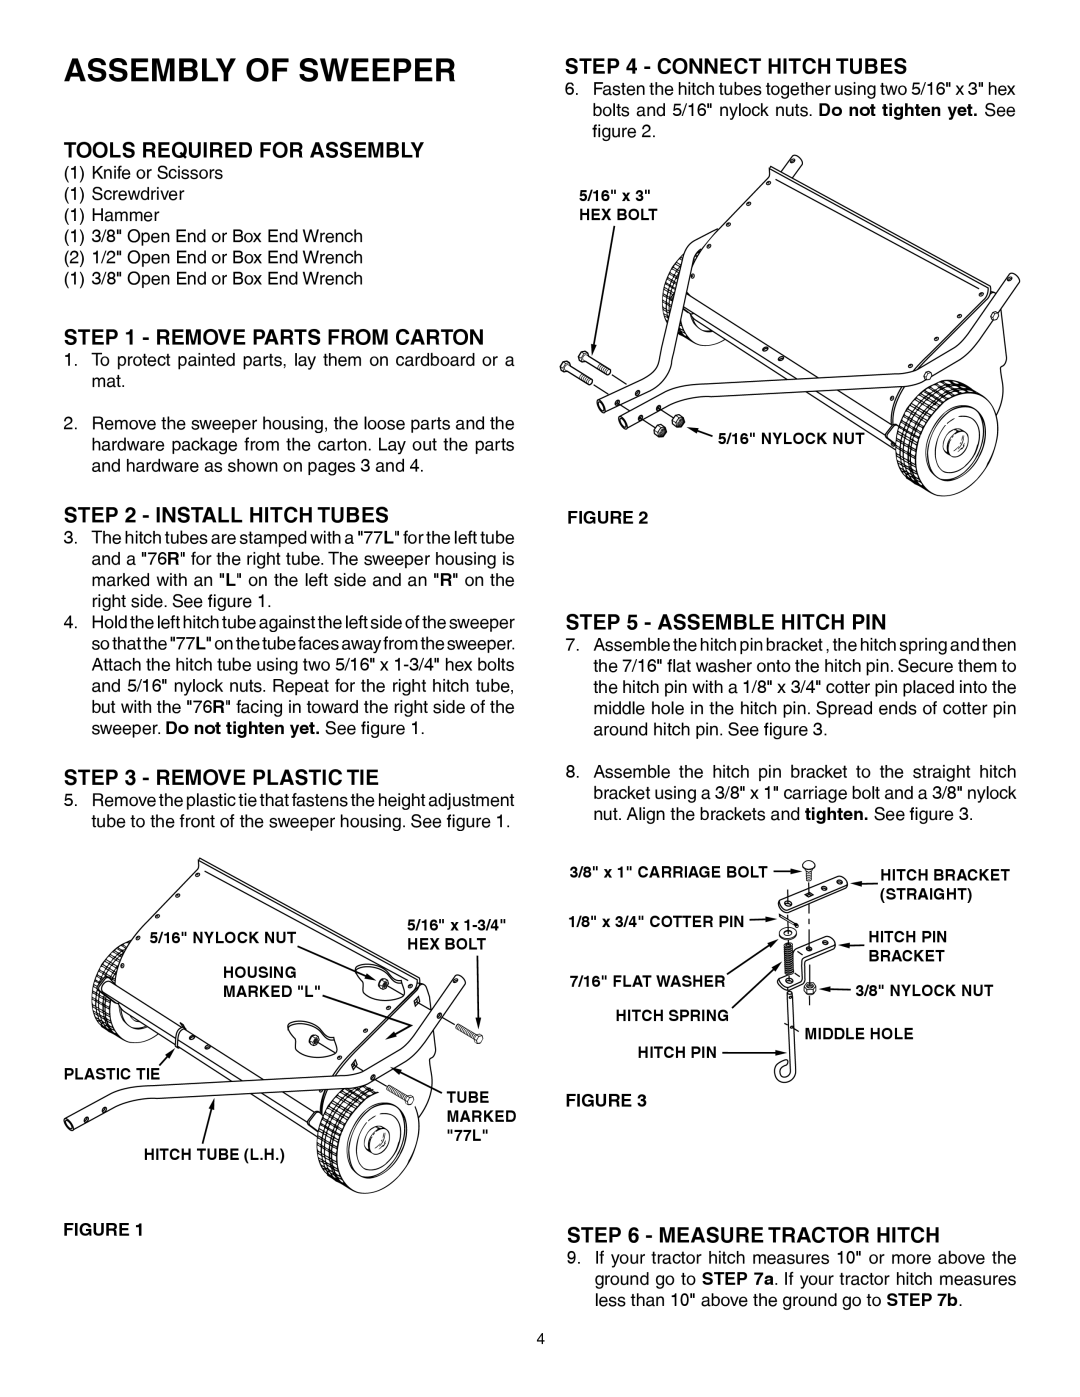 Husqvarna 45-0352 manual Assembly Of Sweeper, Tools Required For Assembly, Remove Parts From Carton, Install Hitch Tubes 